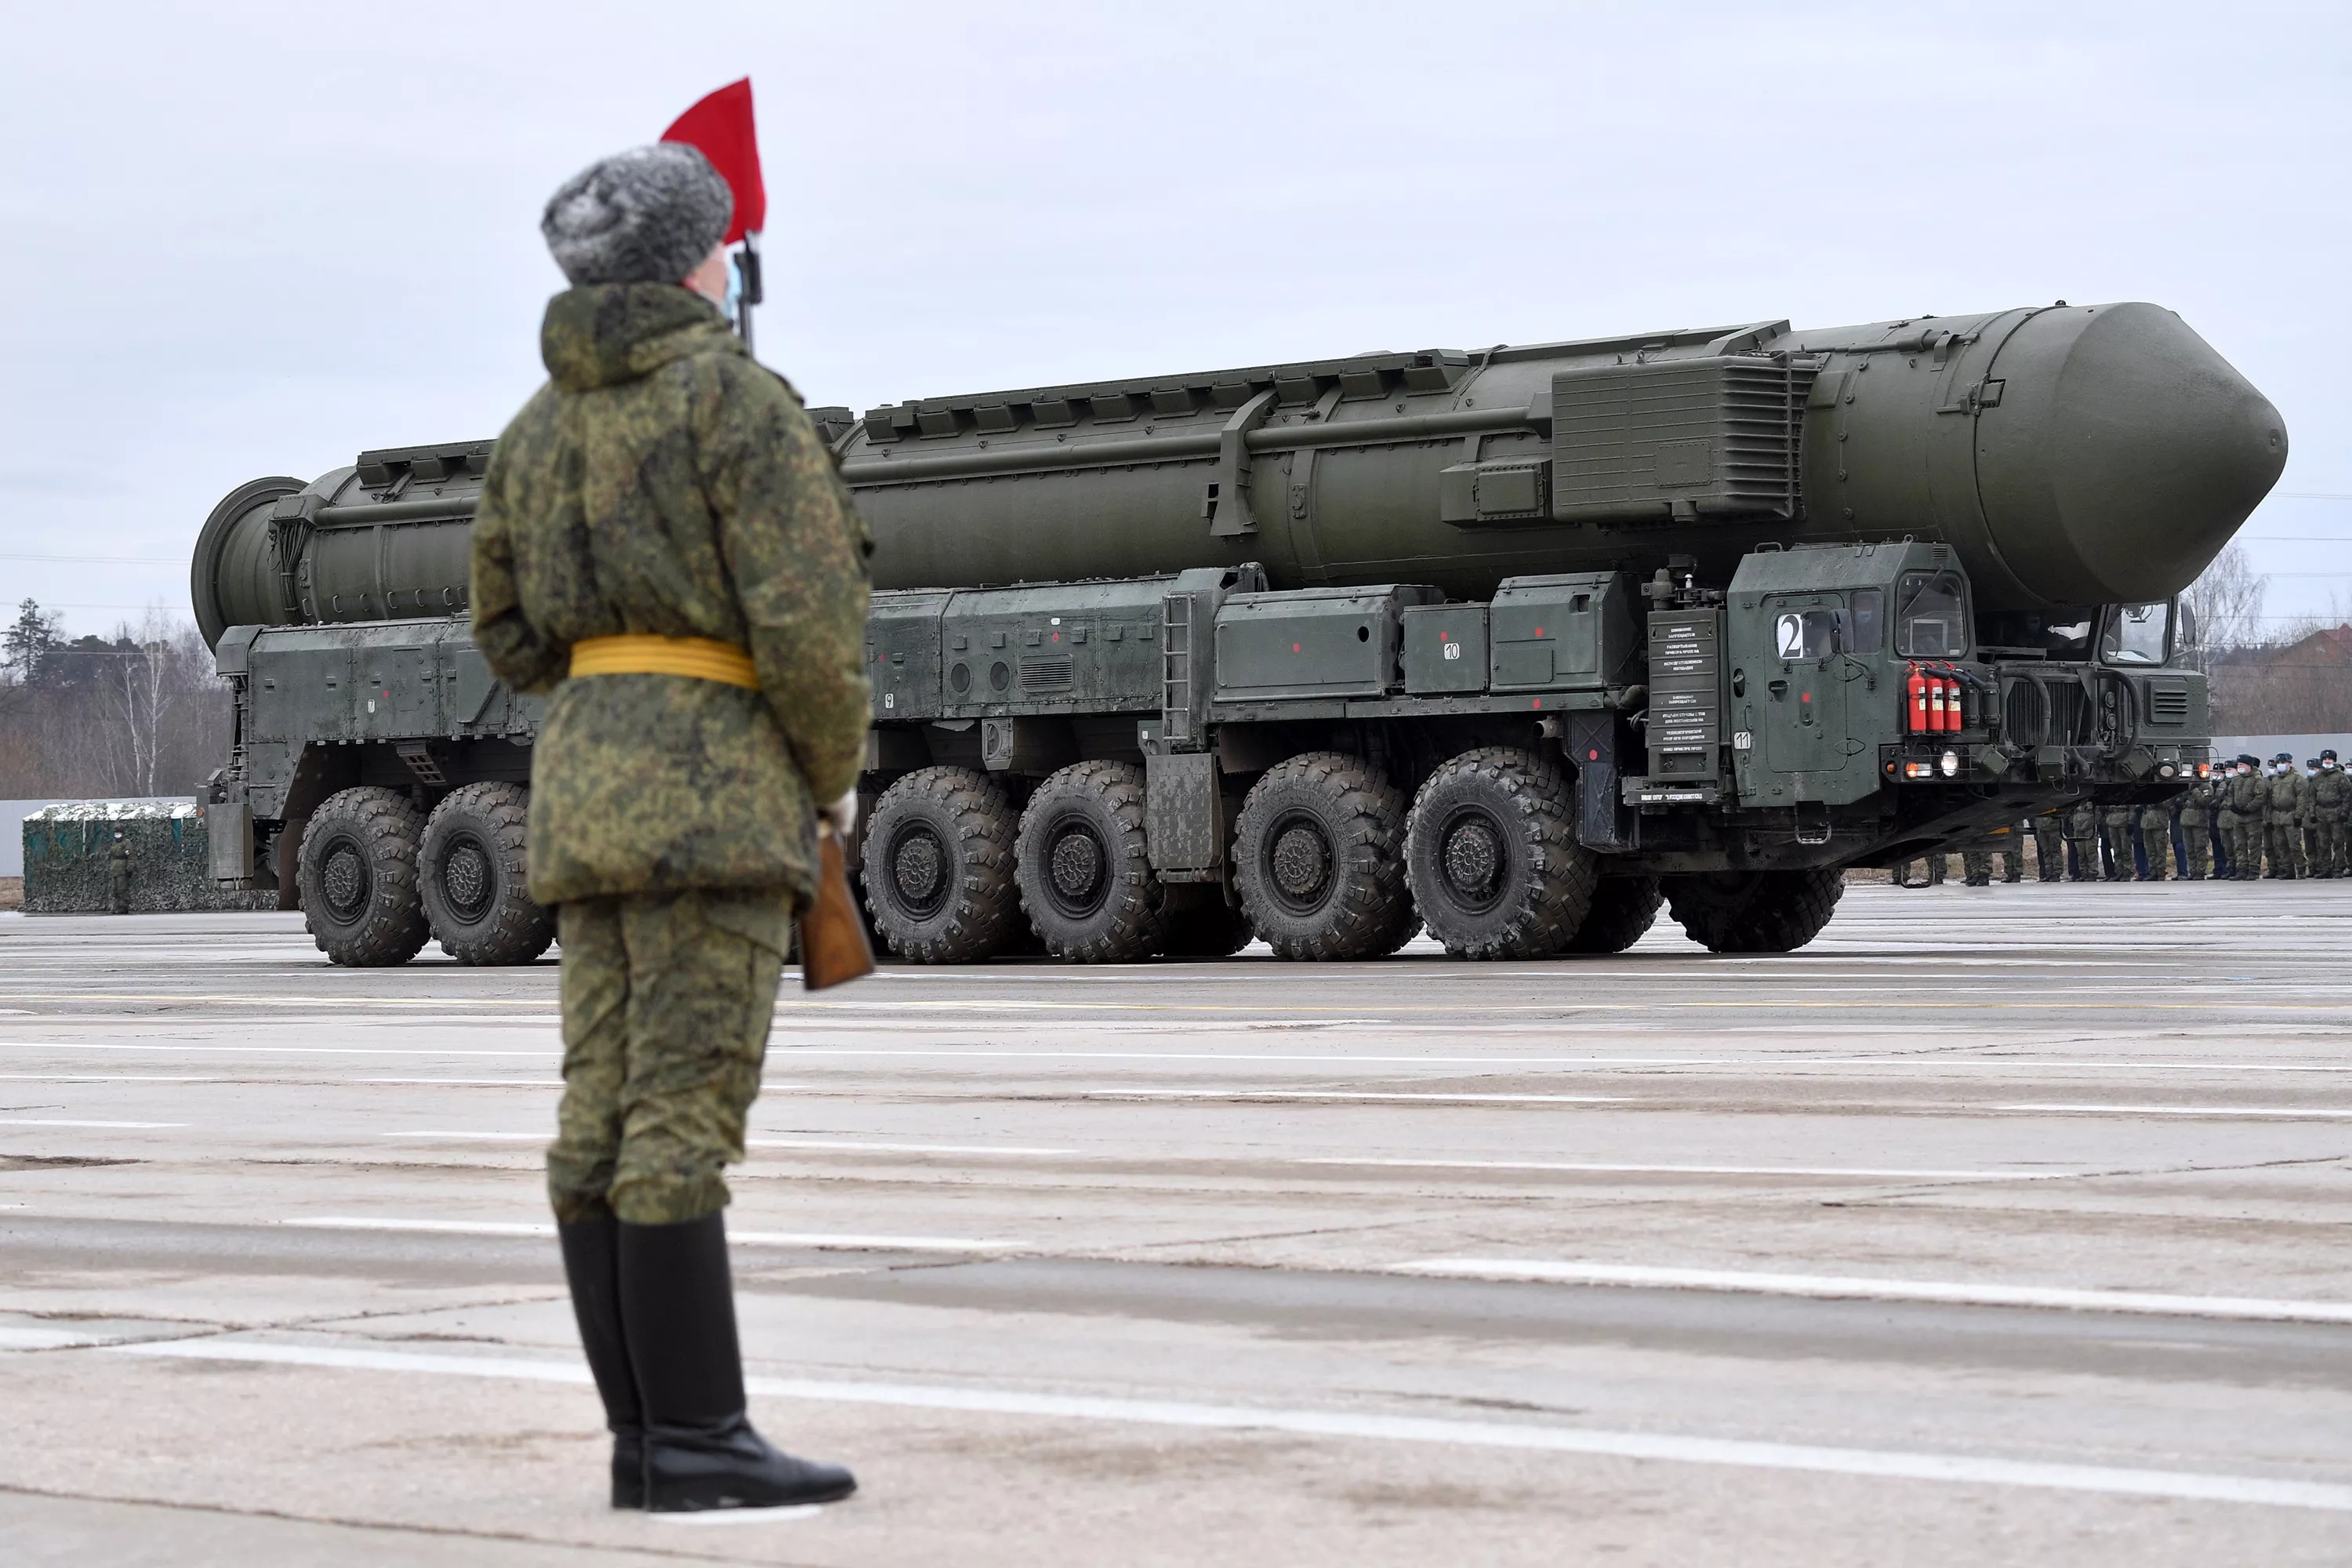 The Russians have launched the SS-27 Mod 2 intercontinental ballistic missile with a range of 12,000 kilometres, which can carry a nuclear warhead with a yield of up to 500 kilotons-4